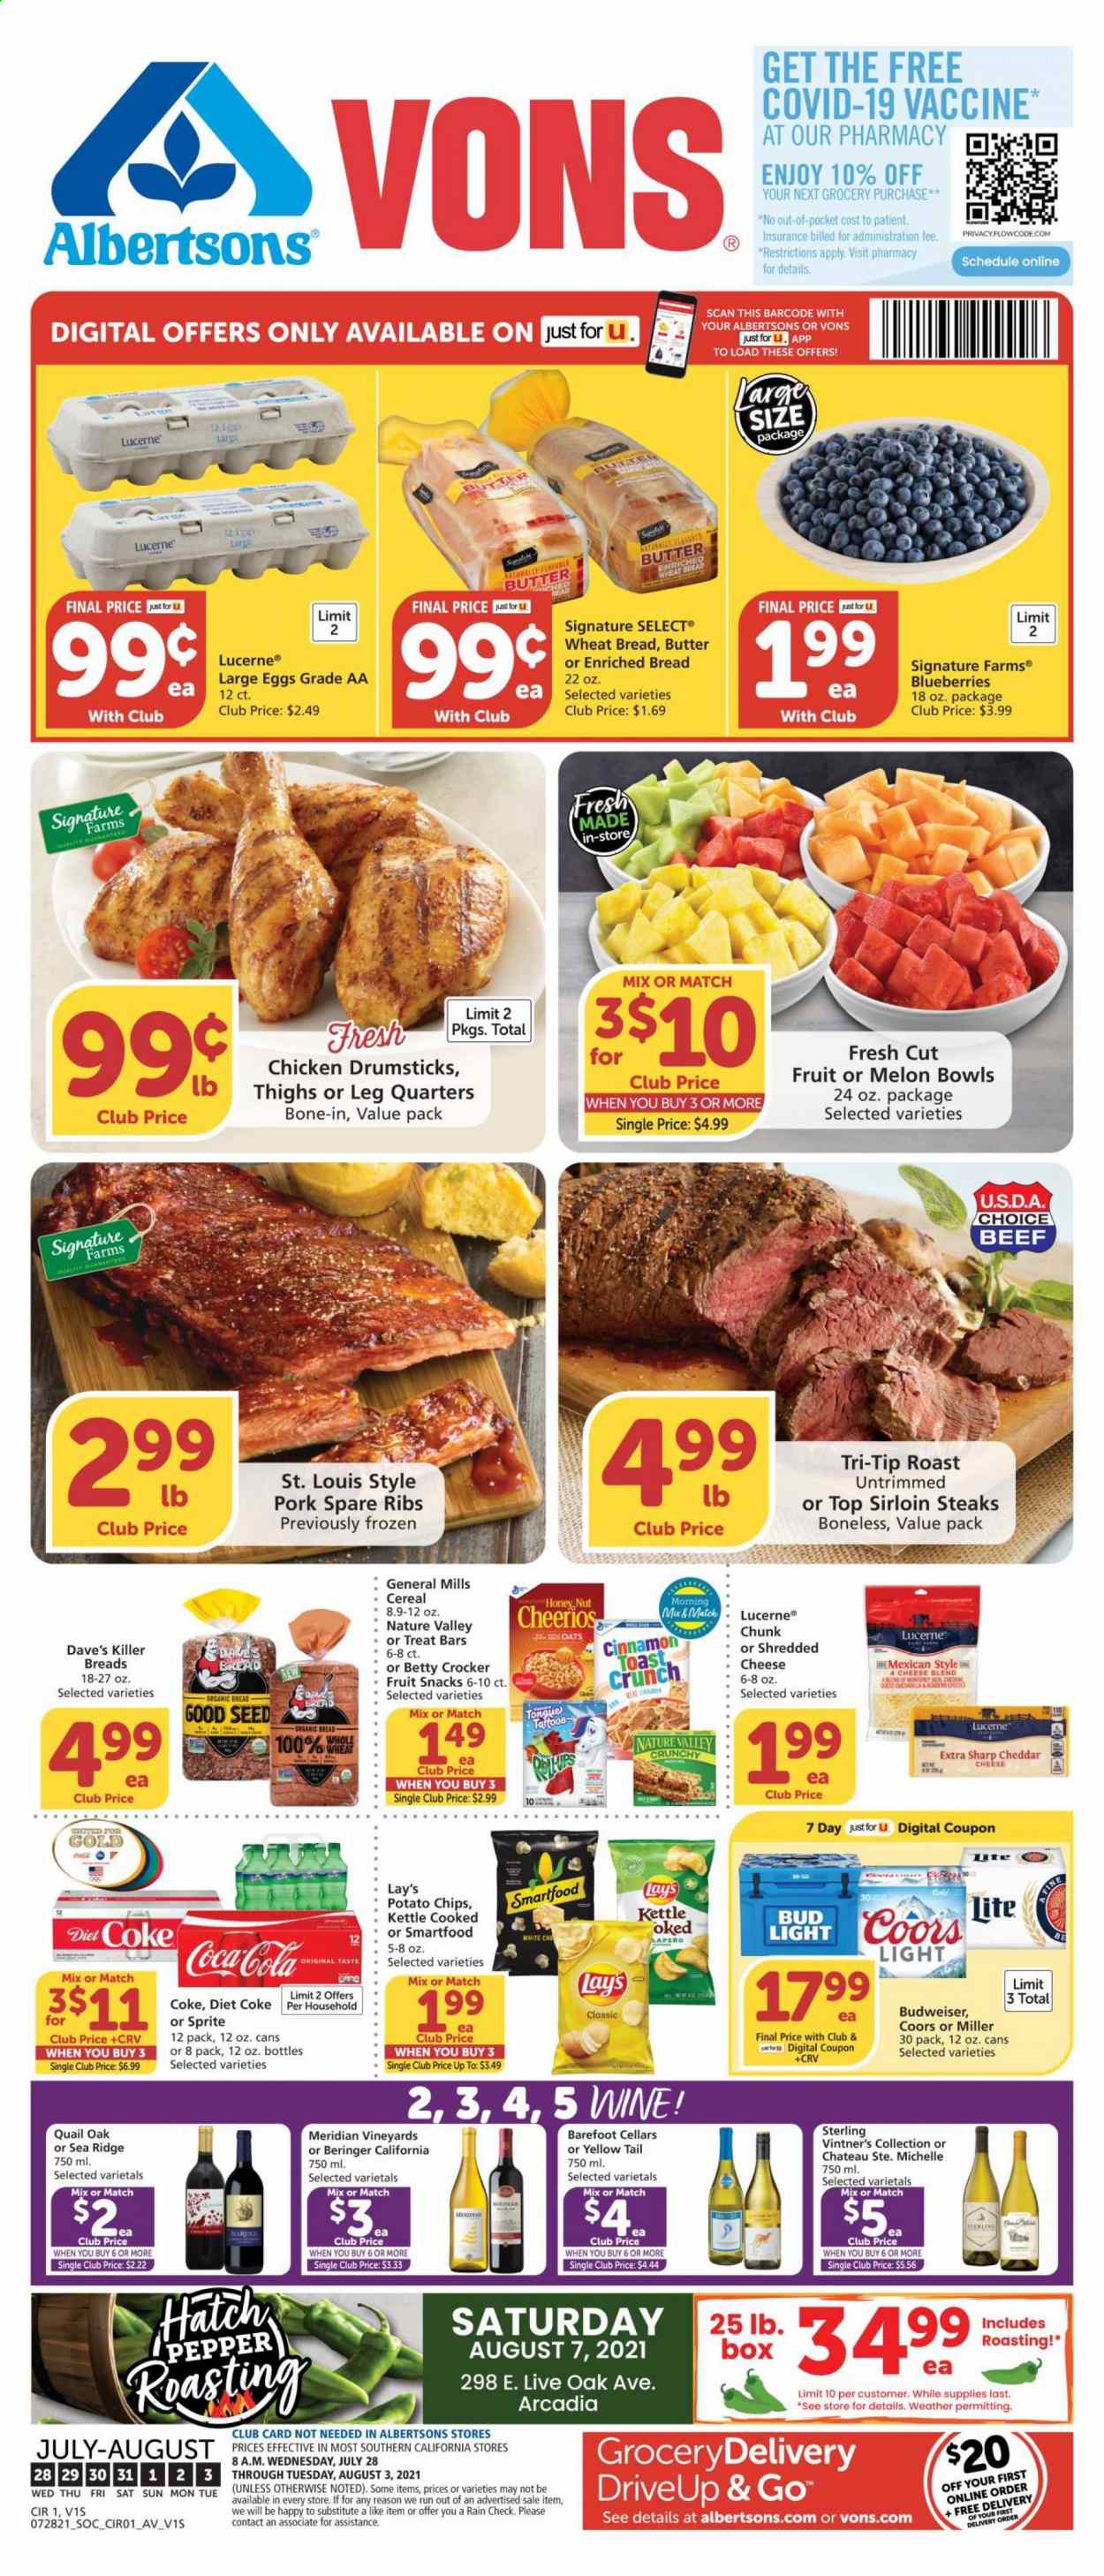 thumbnail - Vons Flyer - 07/28/2021 - 08/03/2021 - Sales products - wheat bread, blueberries, chicken drumsticks, steak, sirloin steak, pork meat, pork ribs, pork spare ribs, shredded cheese, large eggs, butter, fruit snack, potato chips, Lay’s, Smartfood, oats, cereals, Cheerios, Nature Valley, cinnamon, Coca-Cola, Sprite, Diet Coke, wine, Quail Oak, Ron Pelicano, beer, Budweiser, Coors, Bud Light, Miller, plant seeds, melons. Page 1.